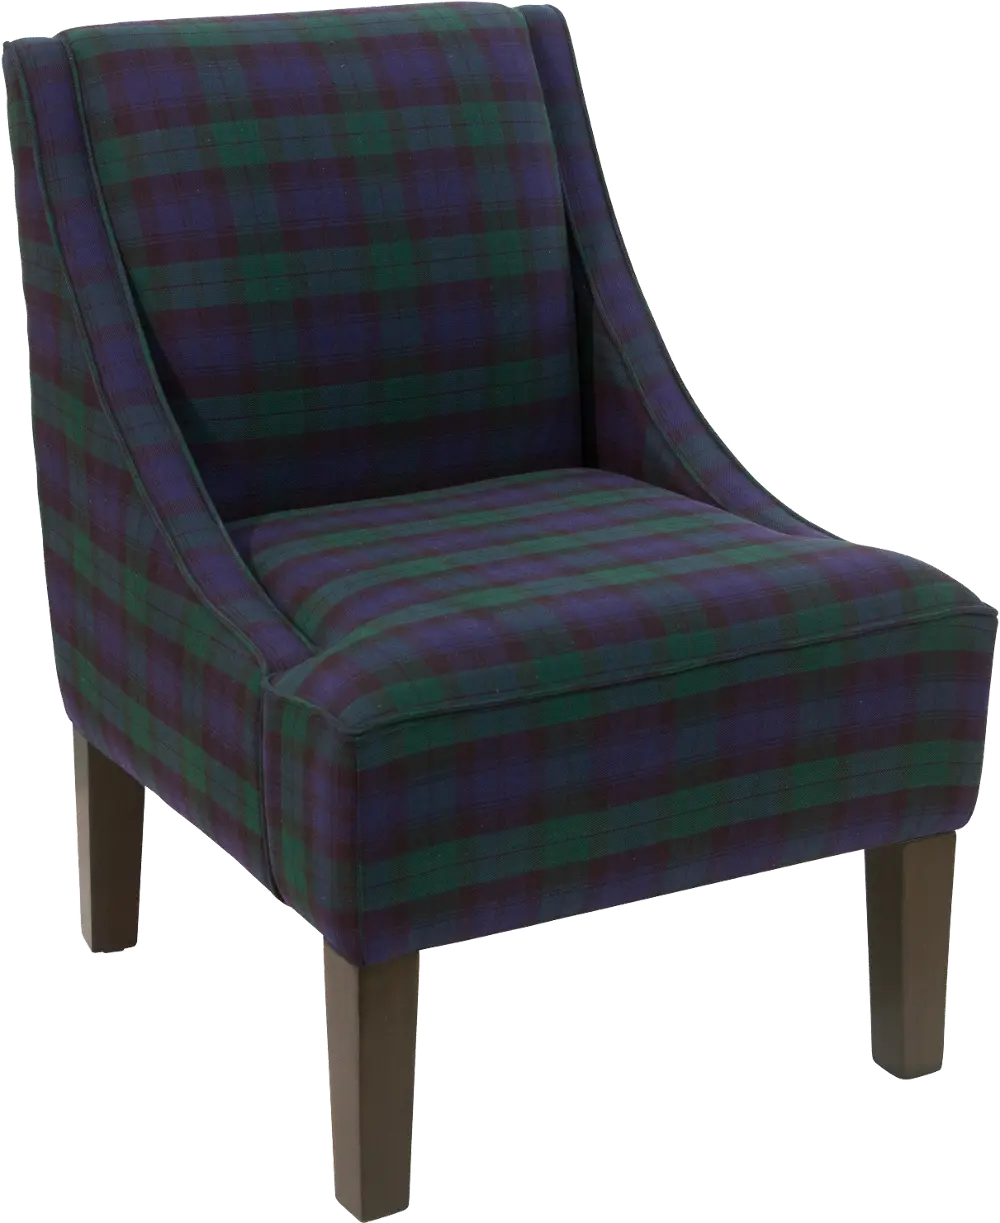 72-1BLCBLC Contemporary Blue, Green and Black Plaid Swoop Arm Chair-1